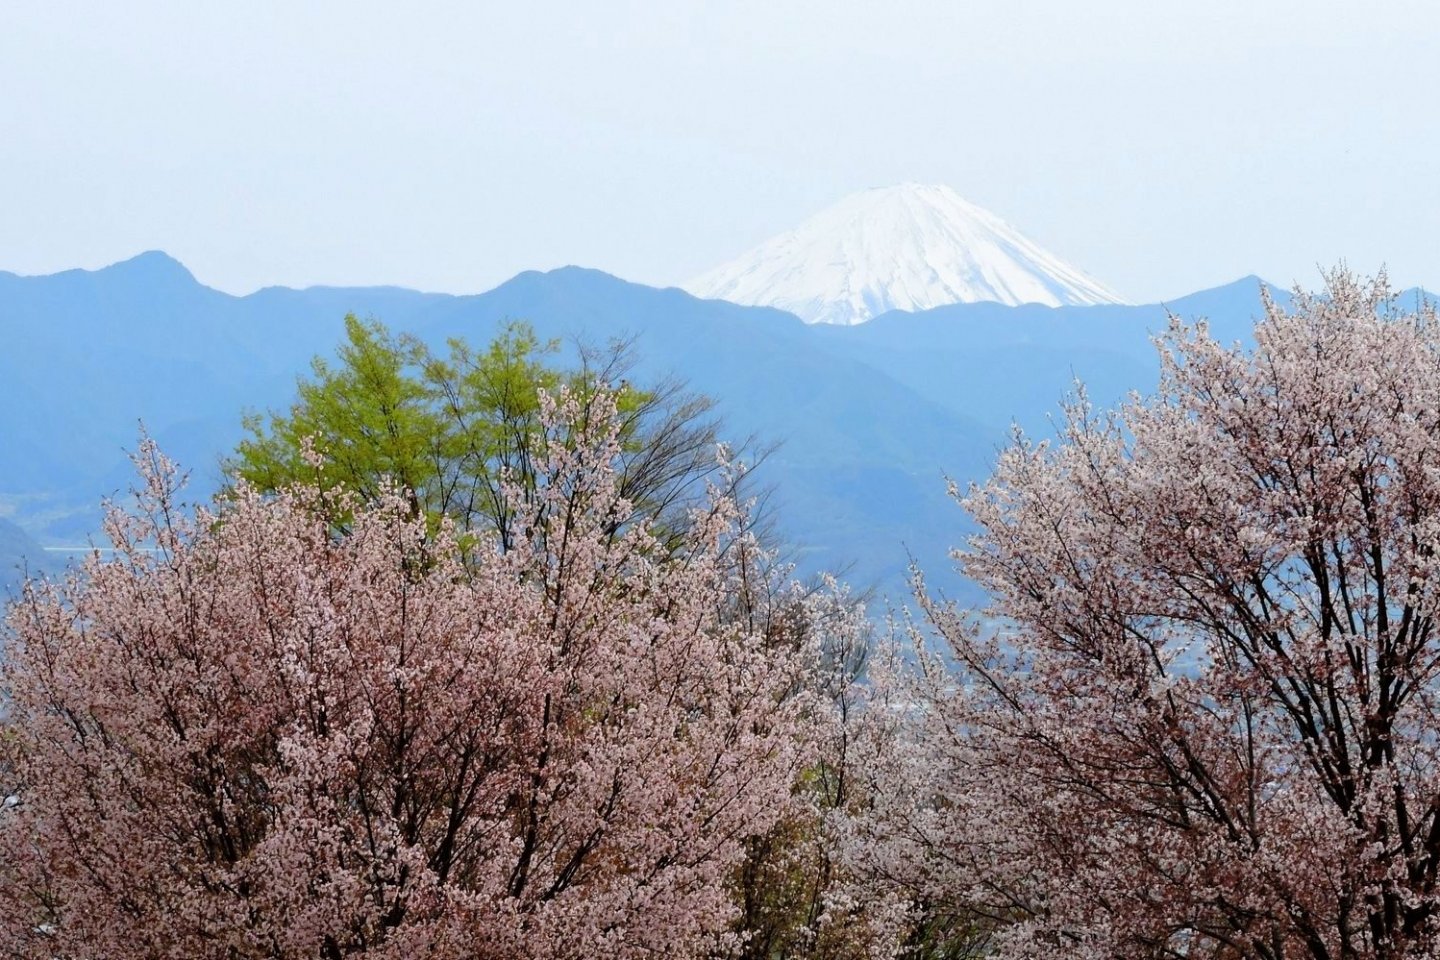 Cherry blossom, blue mountains and Mount Fuji in the distance